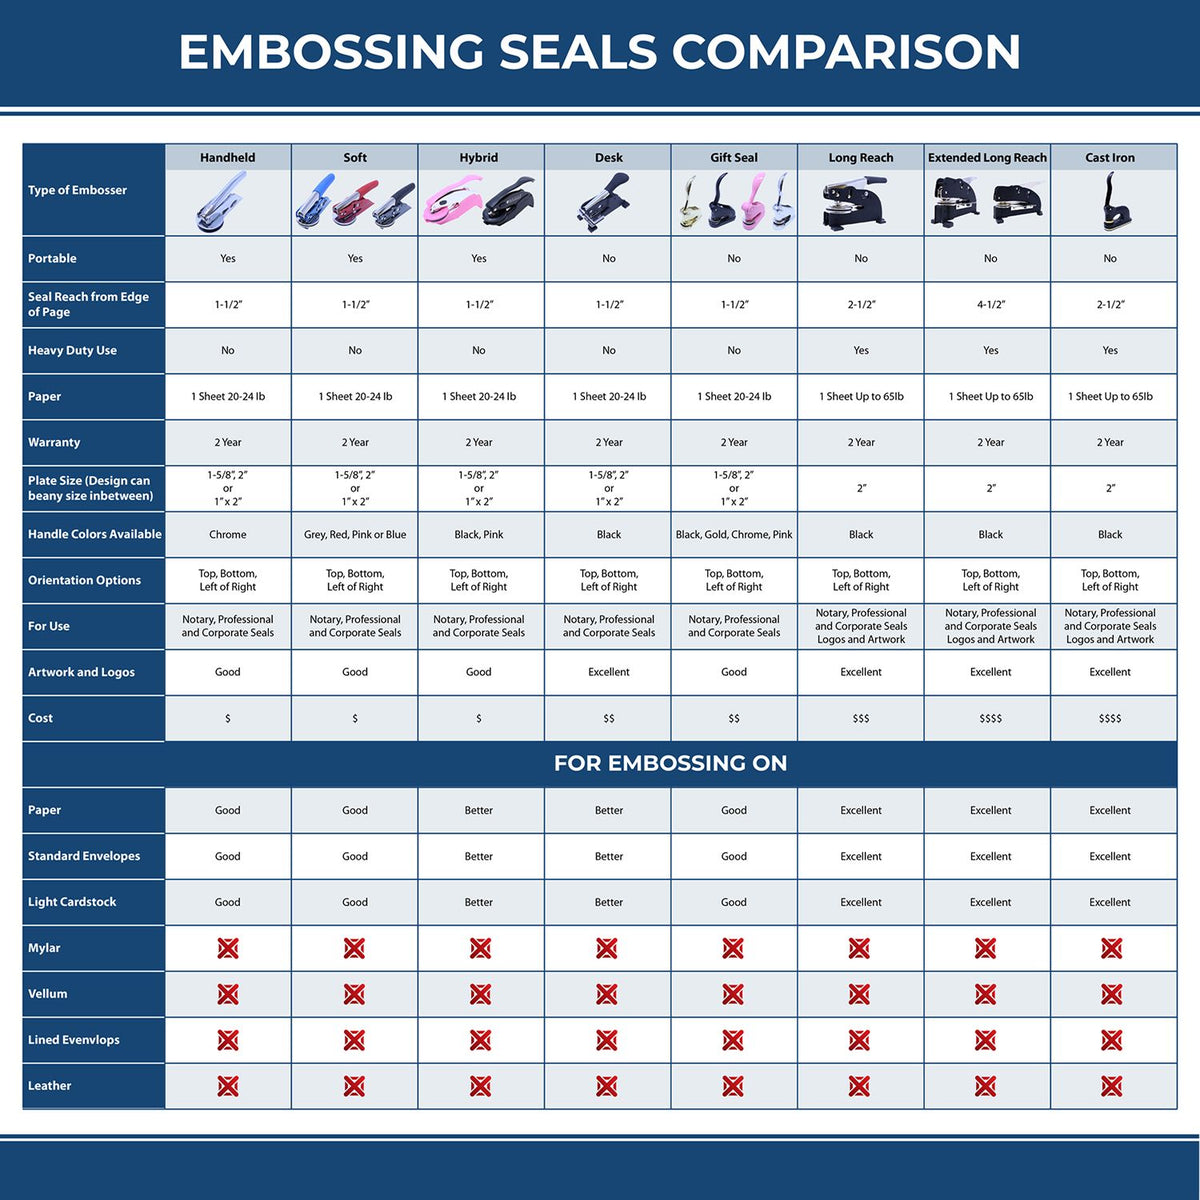 A comparison chart for the different types of mount models available for the Long Reach Alaska PE Seal.